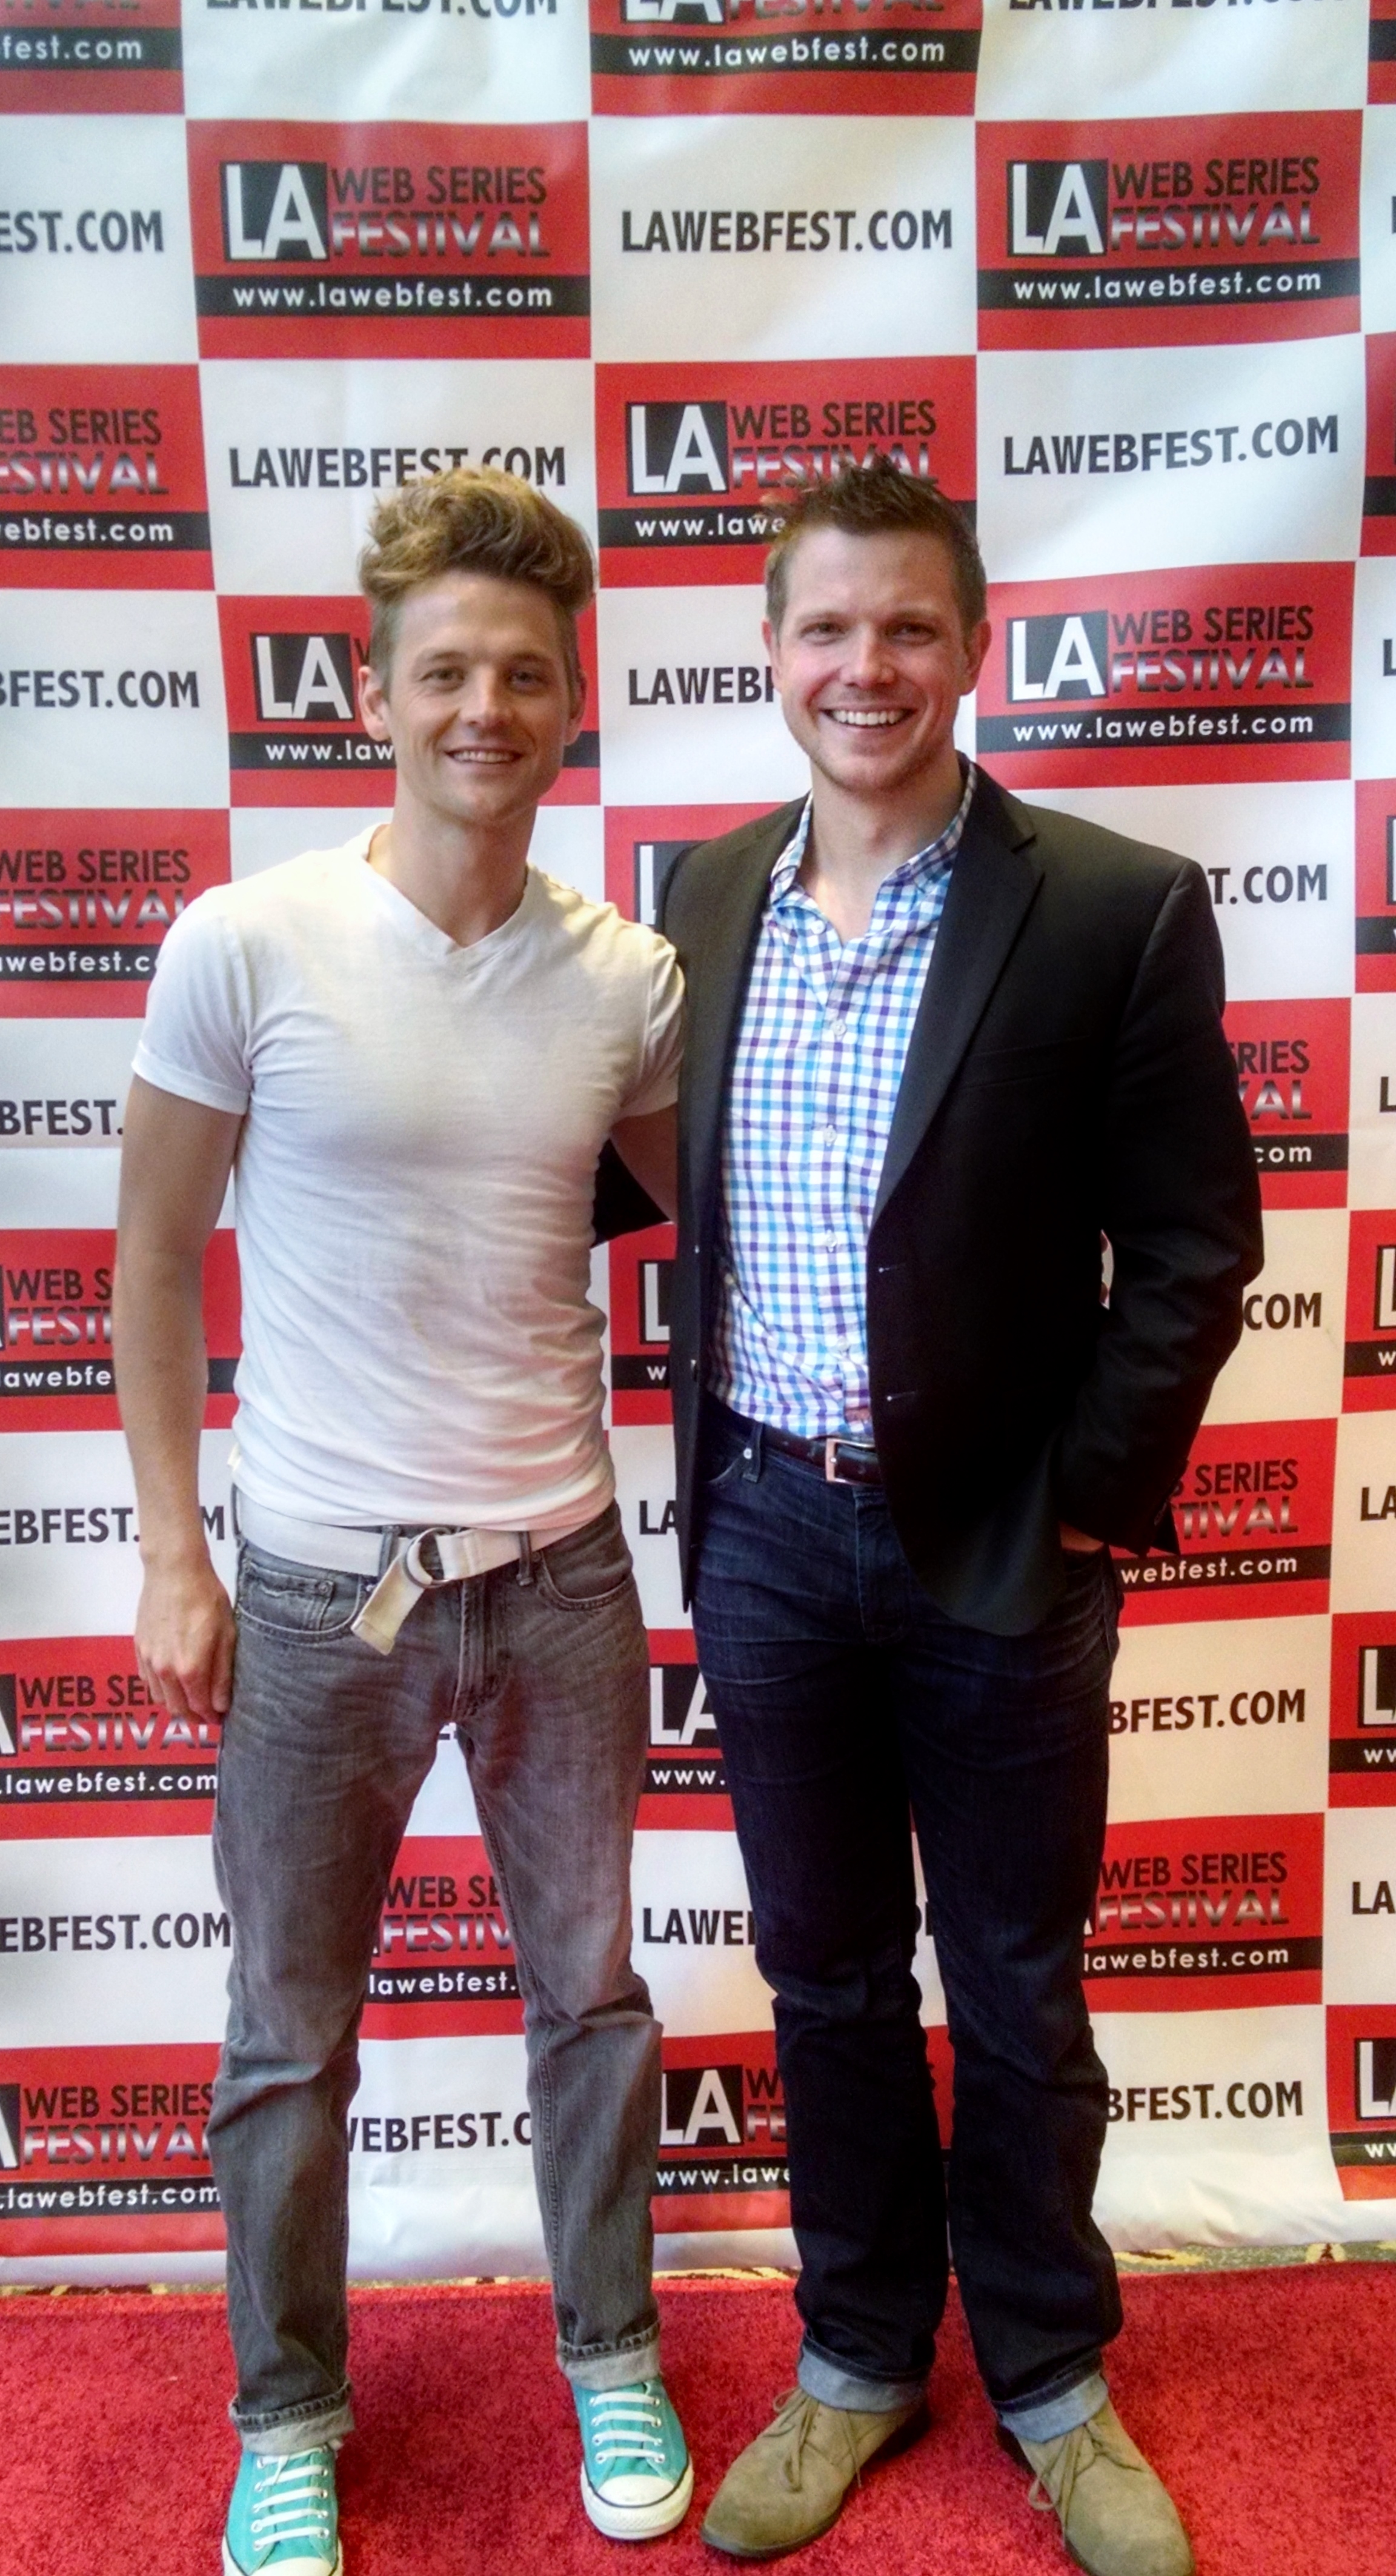 Chris Lamica (Left) and Michael Huntsman (Right) at the 6th Annual LAWebFest for their work in twenties: the series